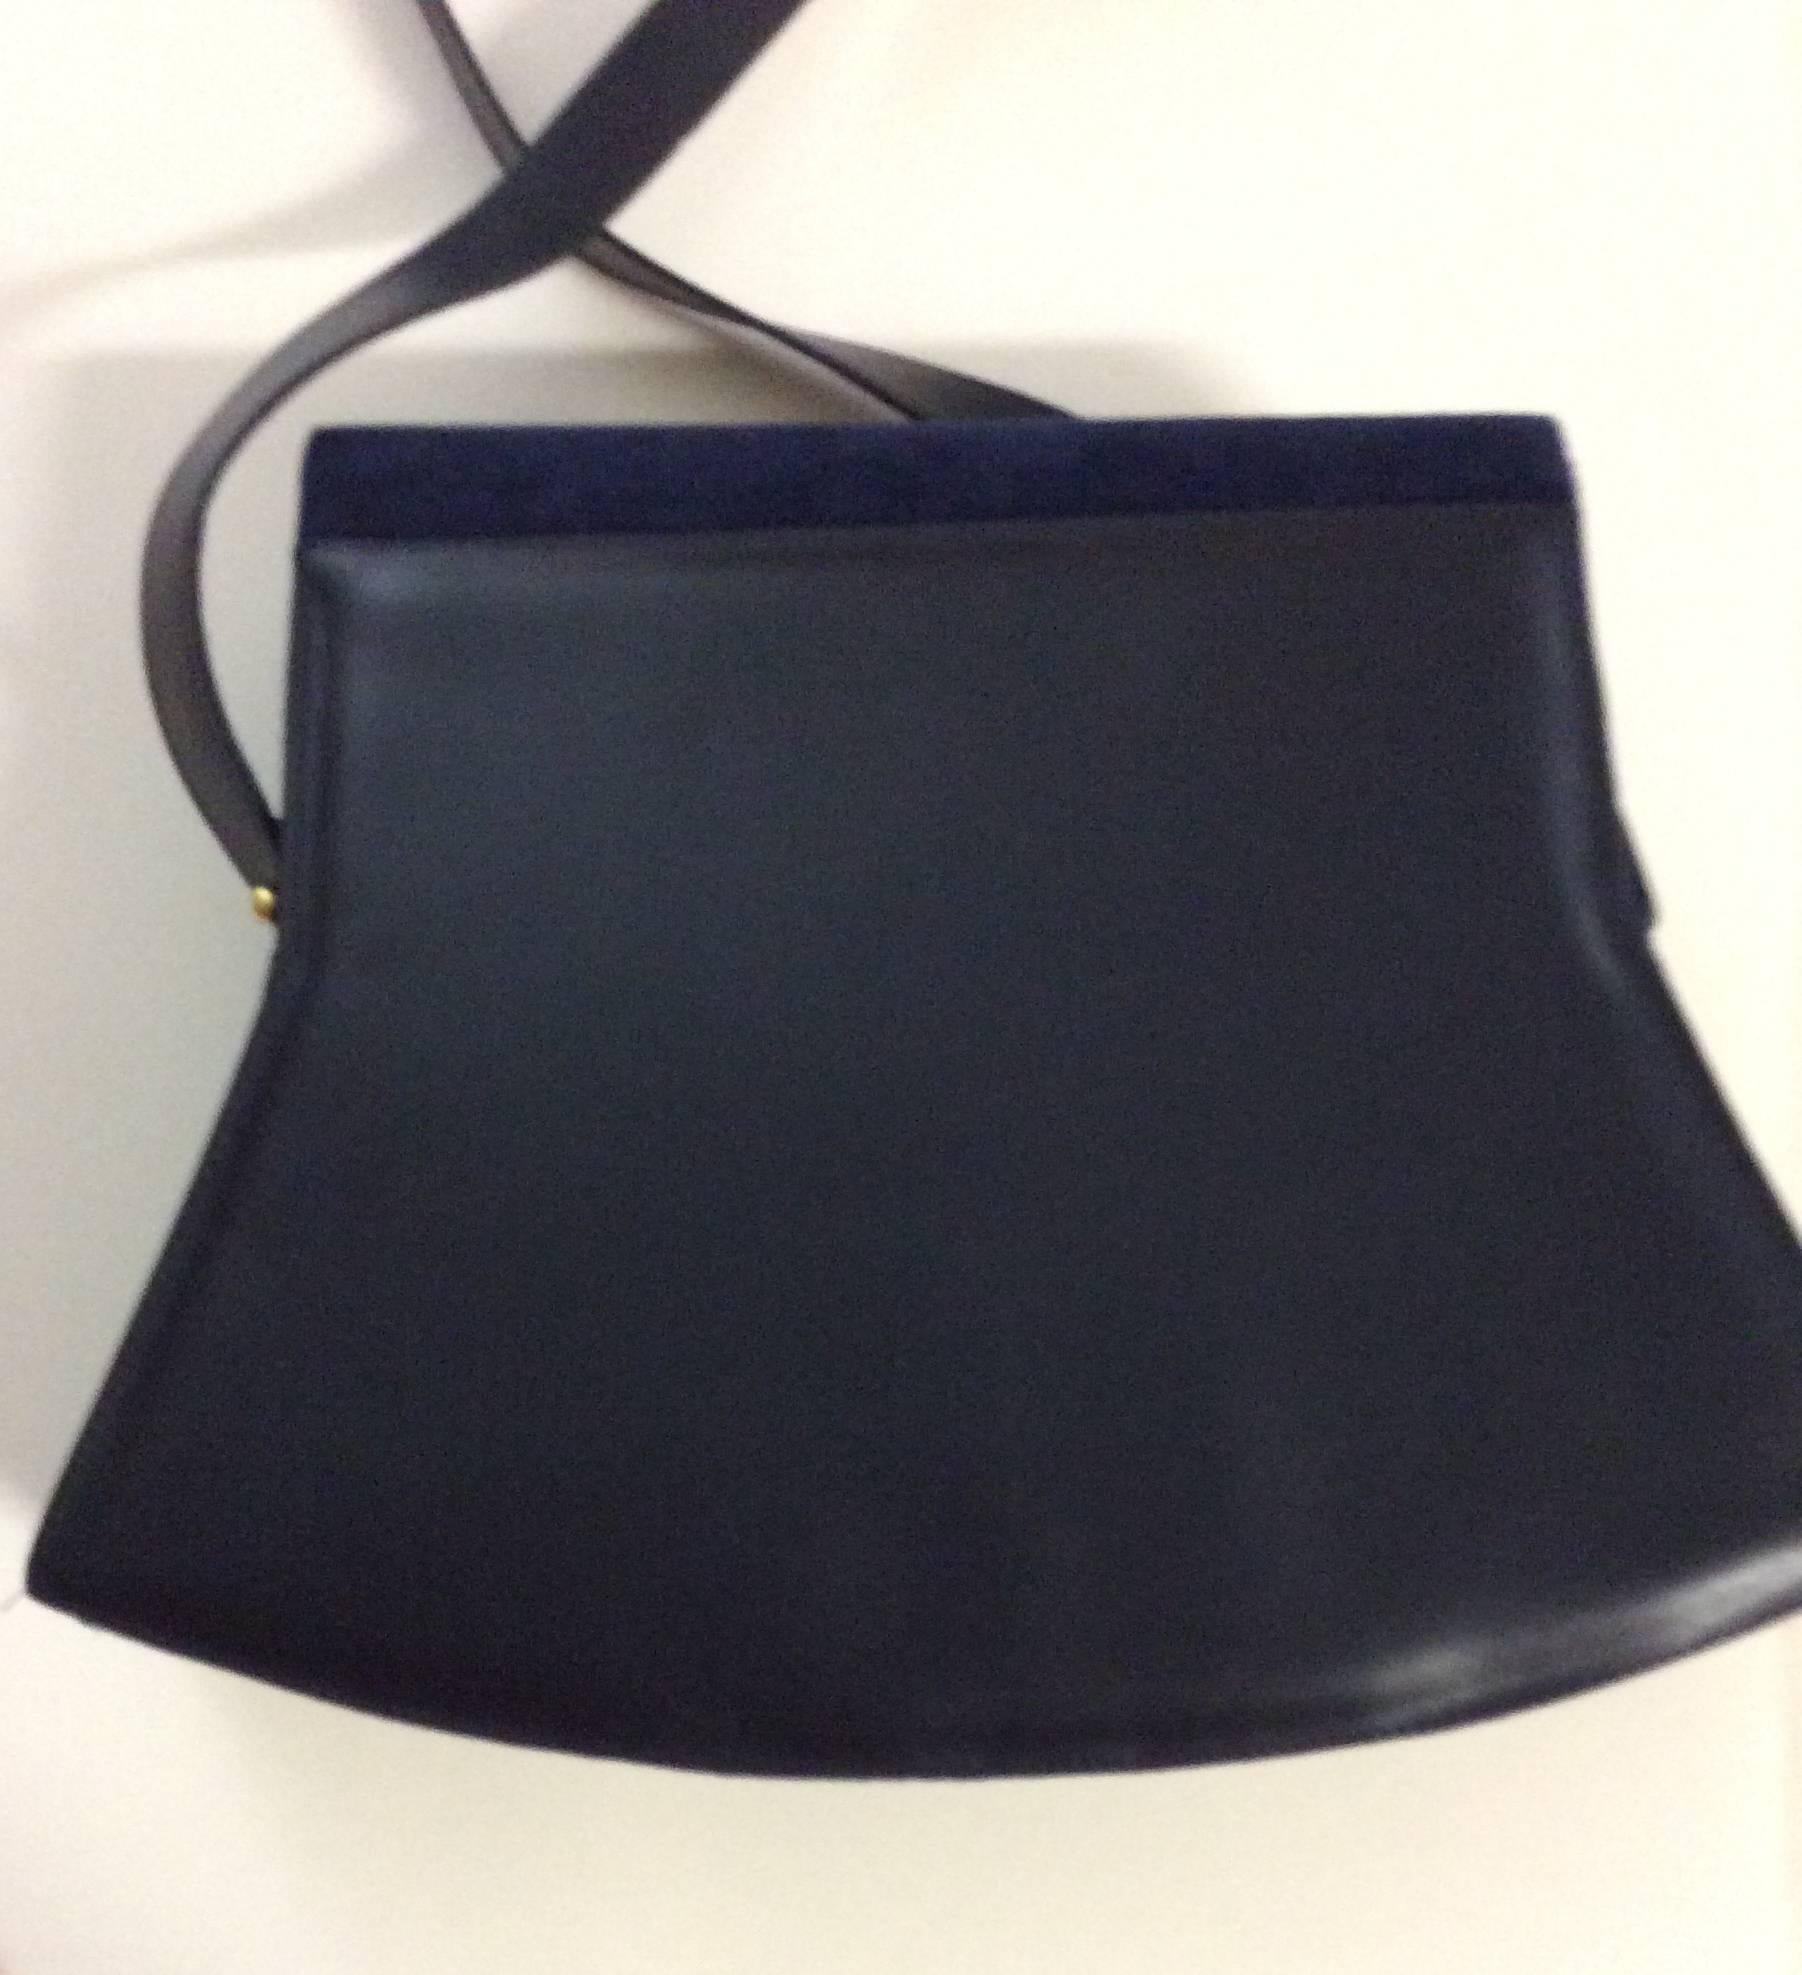 This Charles Jourdan handbag from the 1980's is new and has never been used. The bag has a lovely shape with the front being a navy blue suede and the back is a navy blue leather. There is one gold tone snap enclosure and a strap with two gold tone